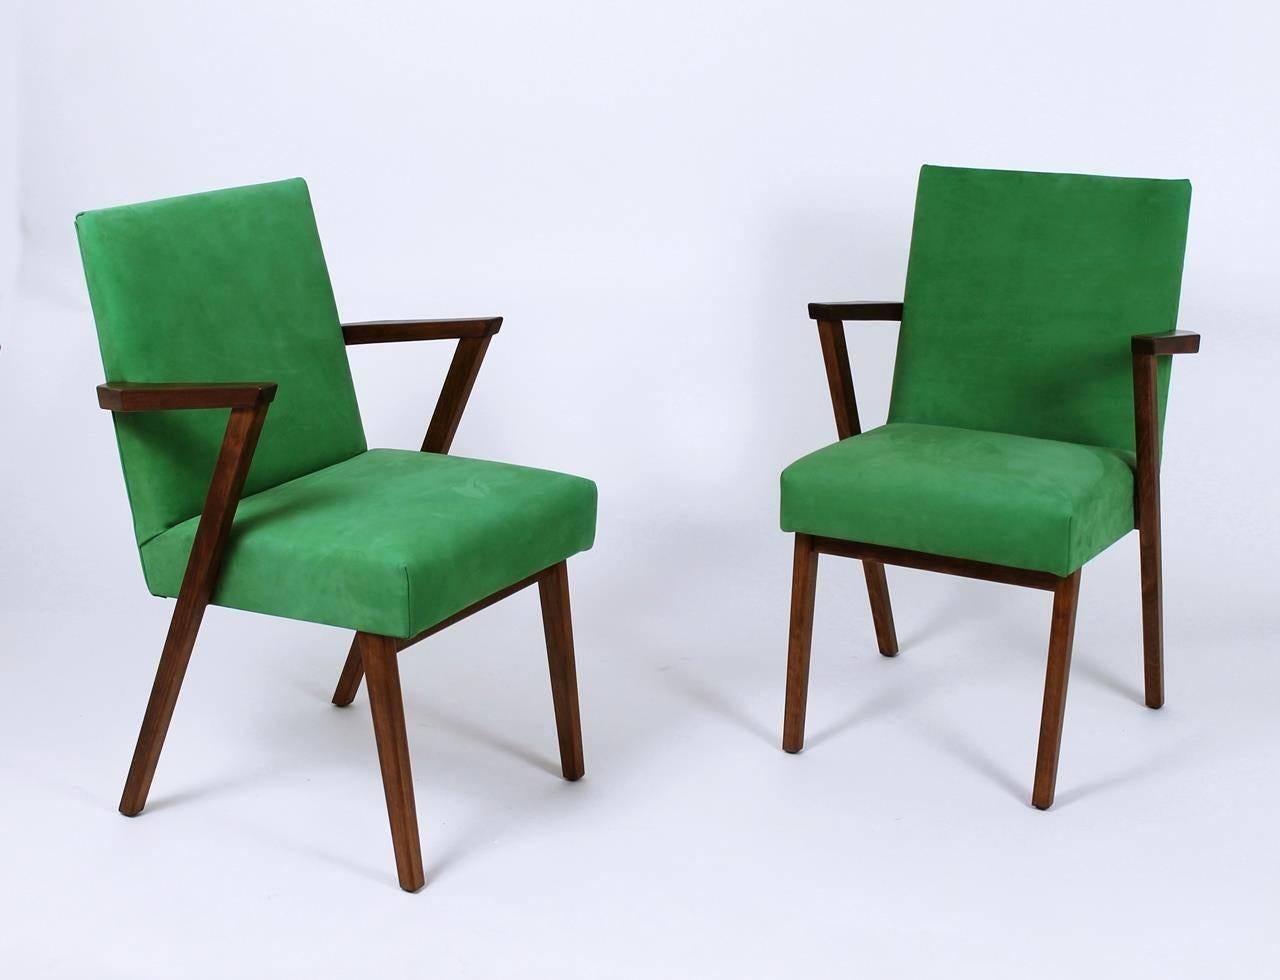 Stunning vintage Mid-Century Modern retro armchair with wedge shaped wood arms by Tijsseling. Newly upholstered in green Italian Nubuck leather.
 